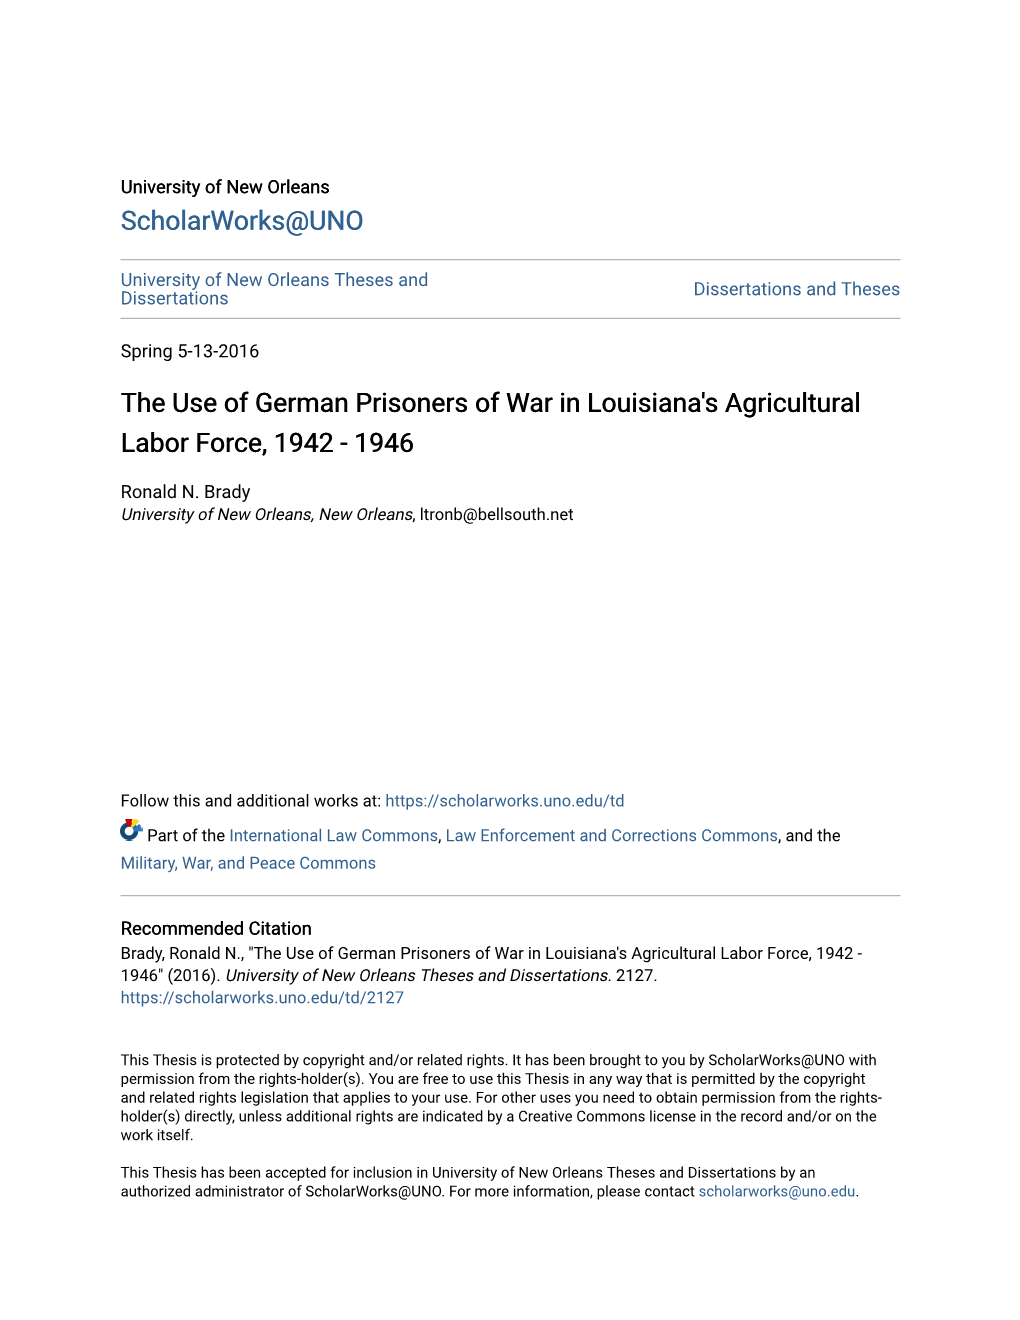 The Use of German Prisoners of War in Louisiana's Agricultural Labor Force, 1942 - 1946